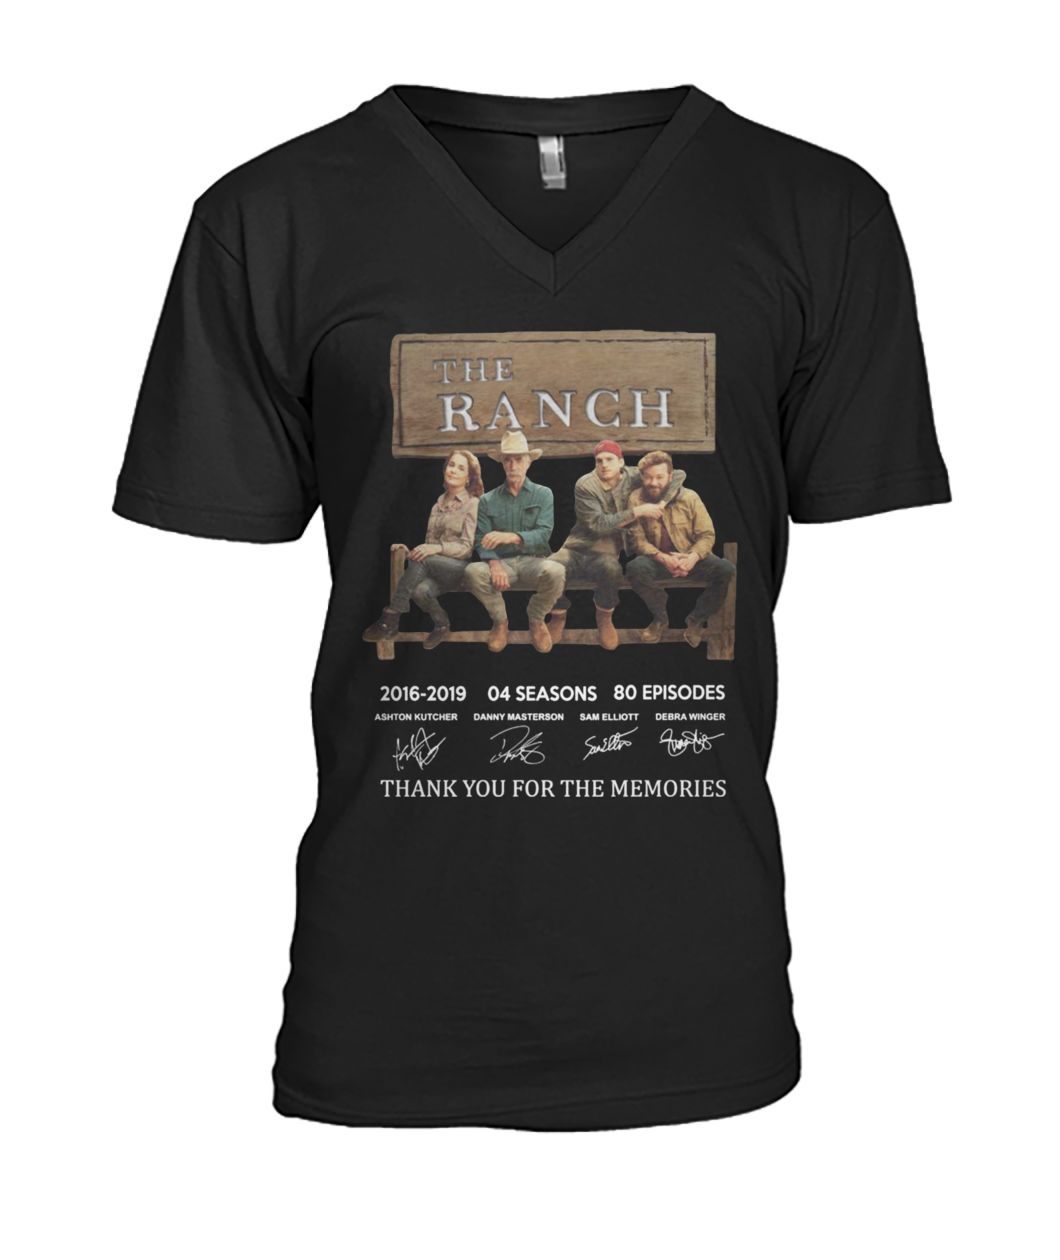 The ranch 2016 2019 04 seasons 80 episodes thank you for the memories signatures mens v-neck